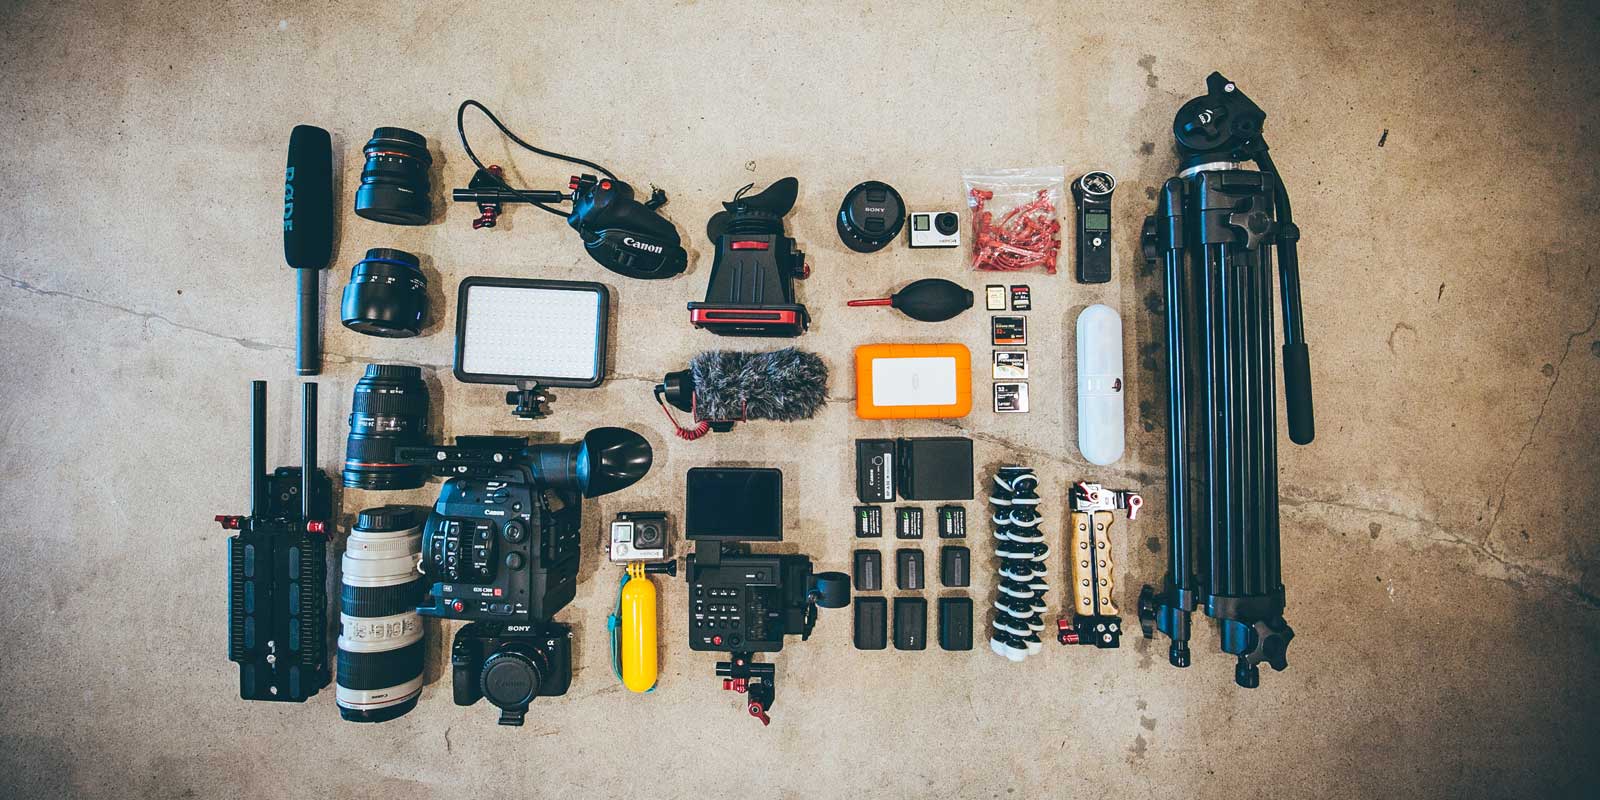 Don't show up to a Disney World park with a photography kit like this. No one needs this much gear for a day at the park. Security will obviously think you're there to get photos and footage for commercial purposes. Check out this post for a quick and easy guide to the camera rules at Disney World.